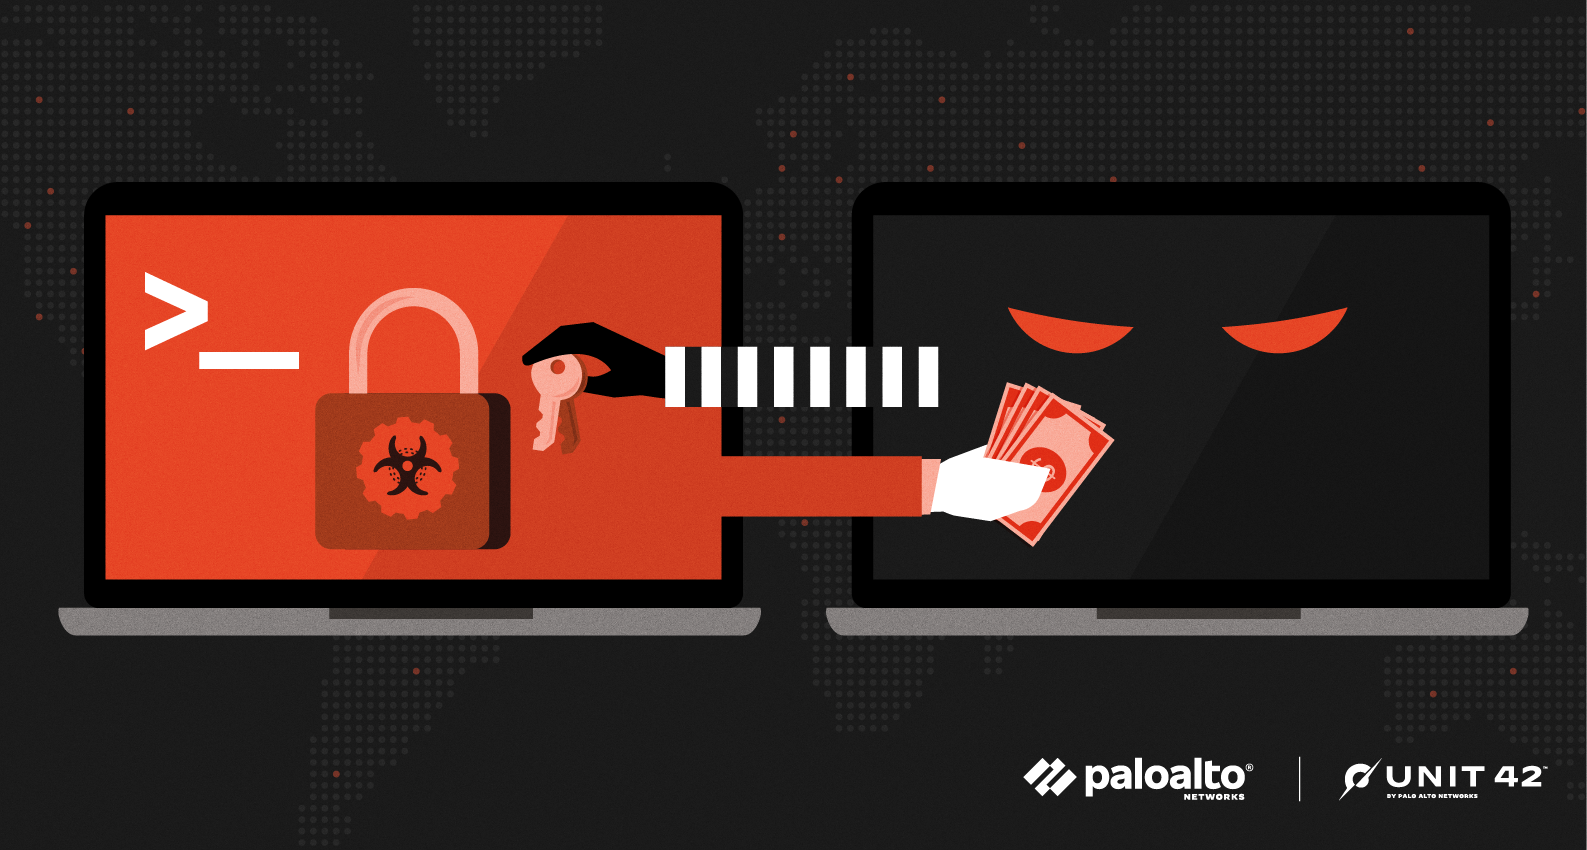 A conceptual image representing ransomware, such as LockBit 2.0, discussed here.